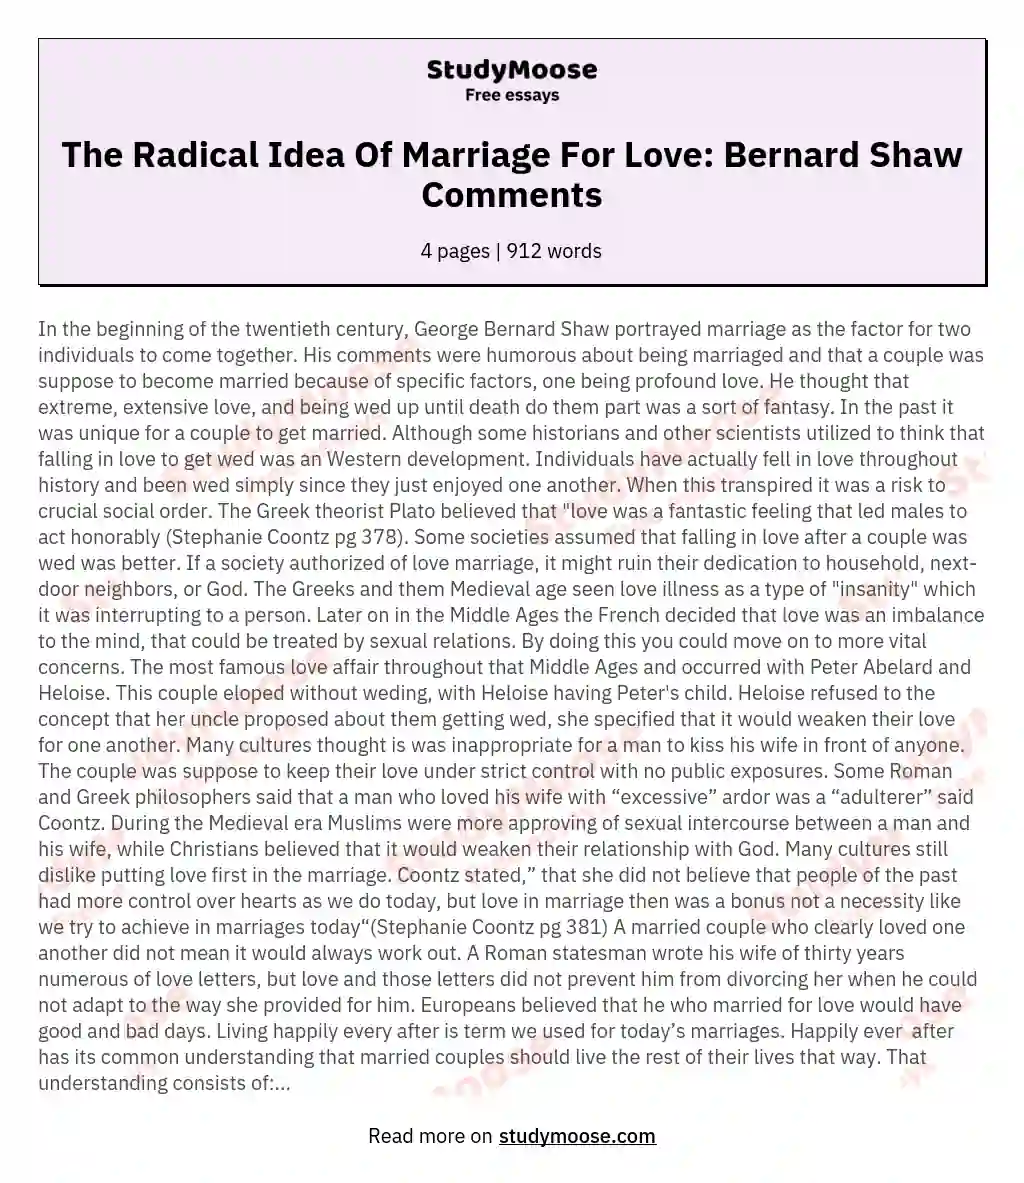 The Radical Idea Of Marriage For Love: Bernard Shaw Comments essay